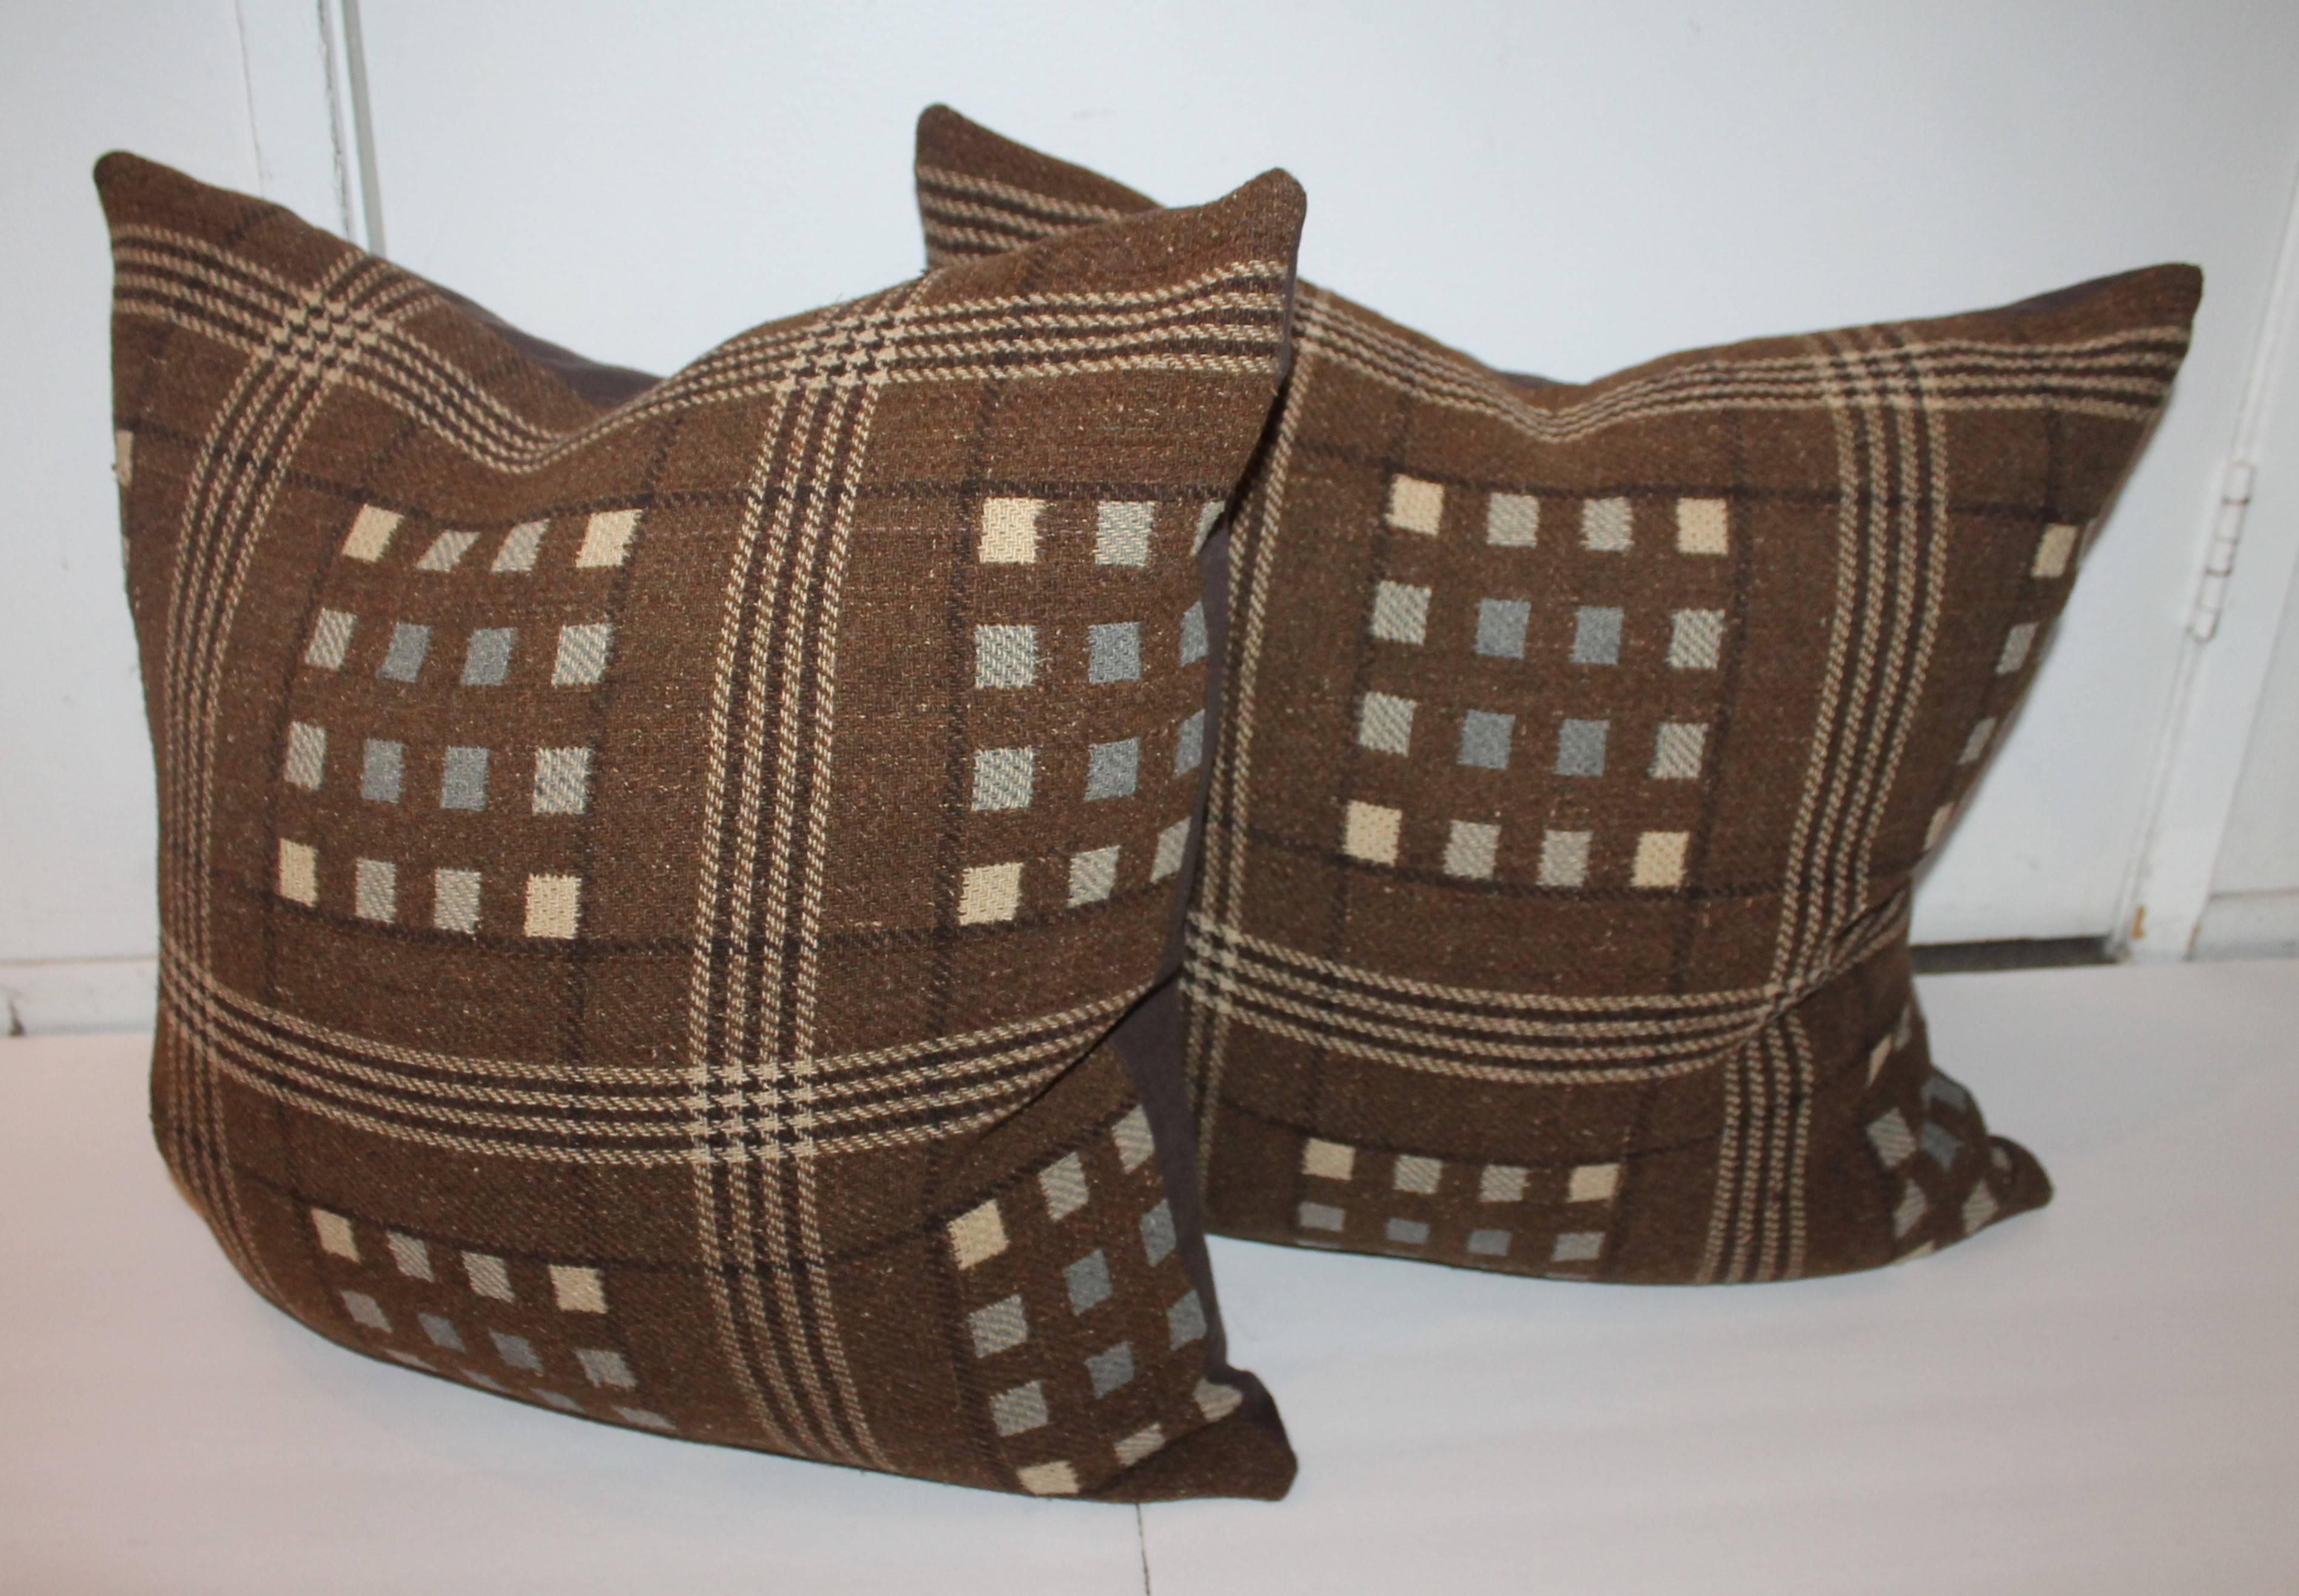 Pair of horse blanket pillows with linen backing, down and feather insert and zipper closure on bottom.